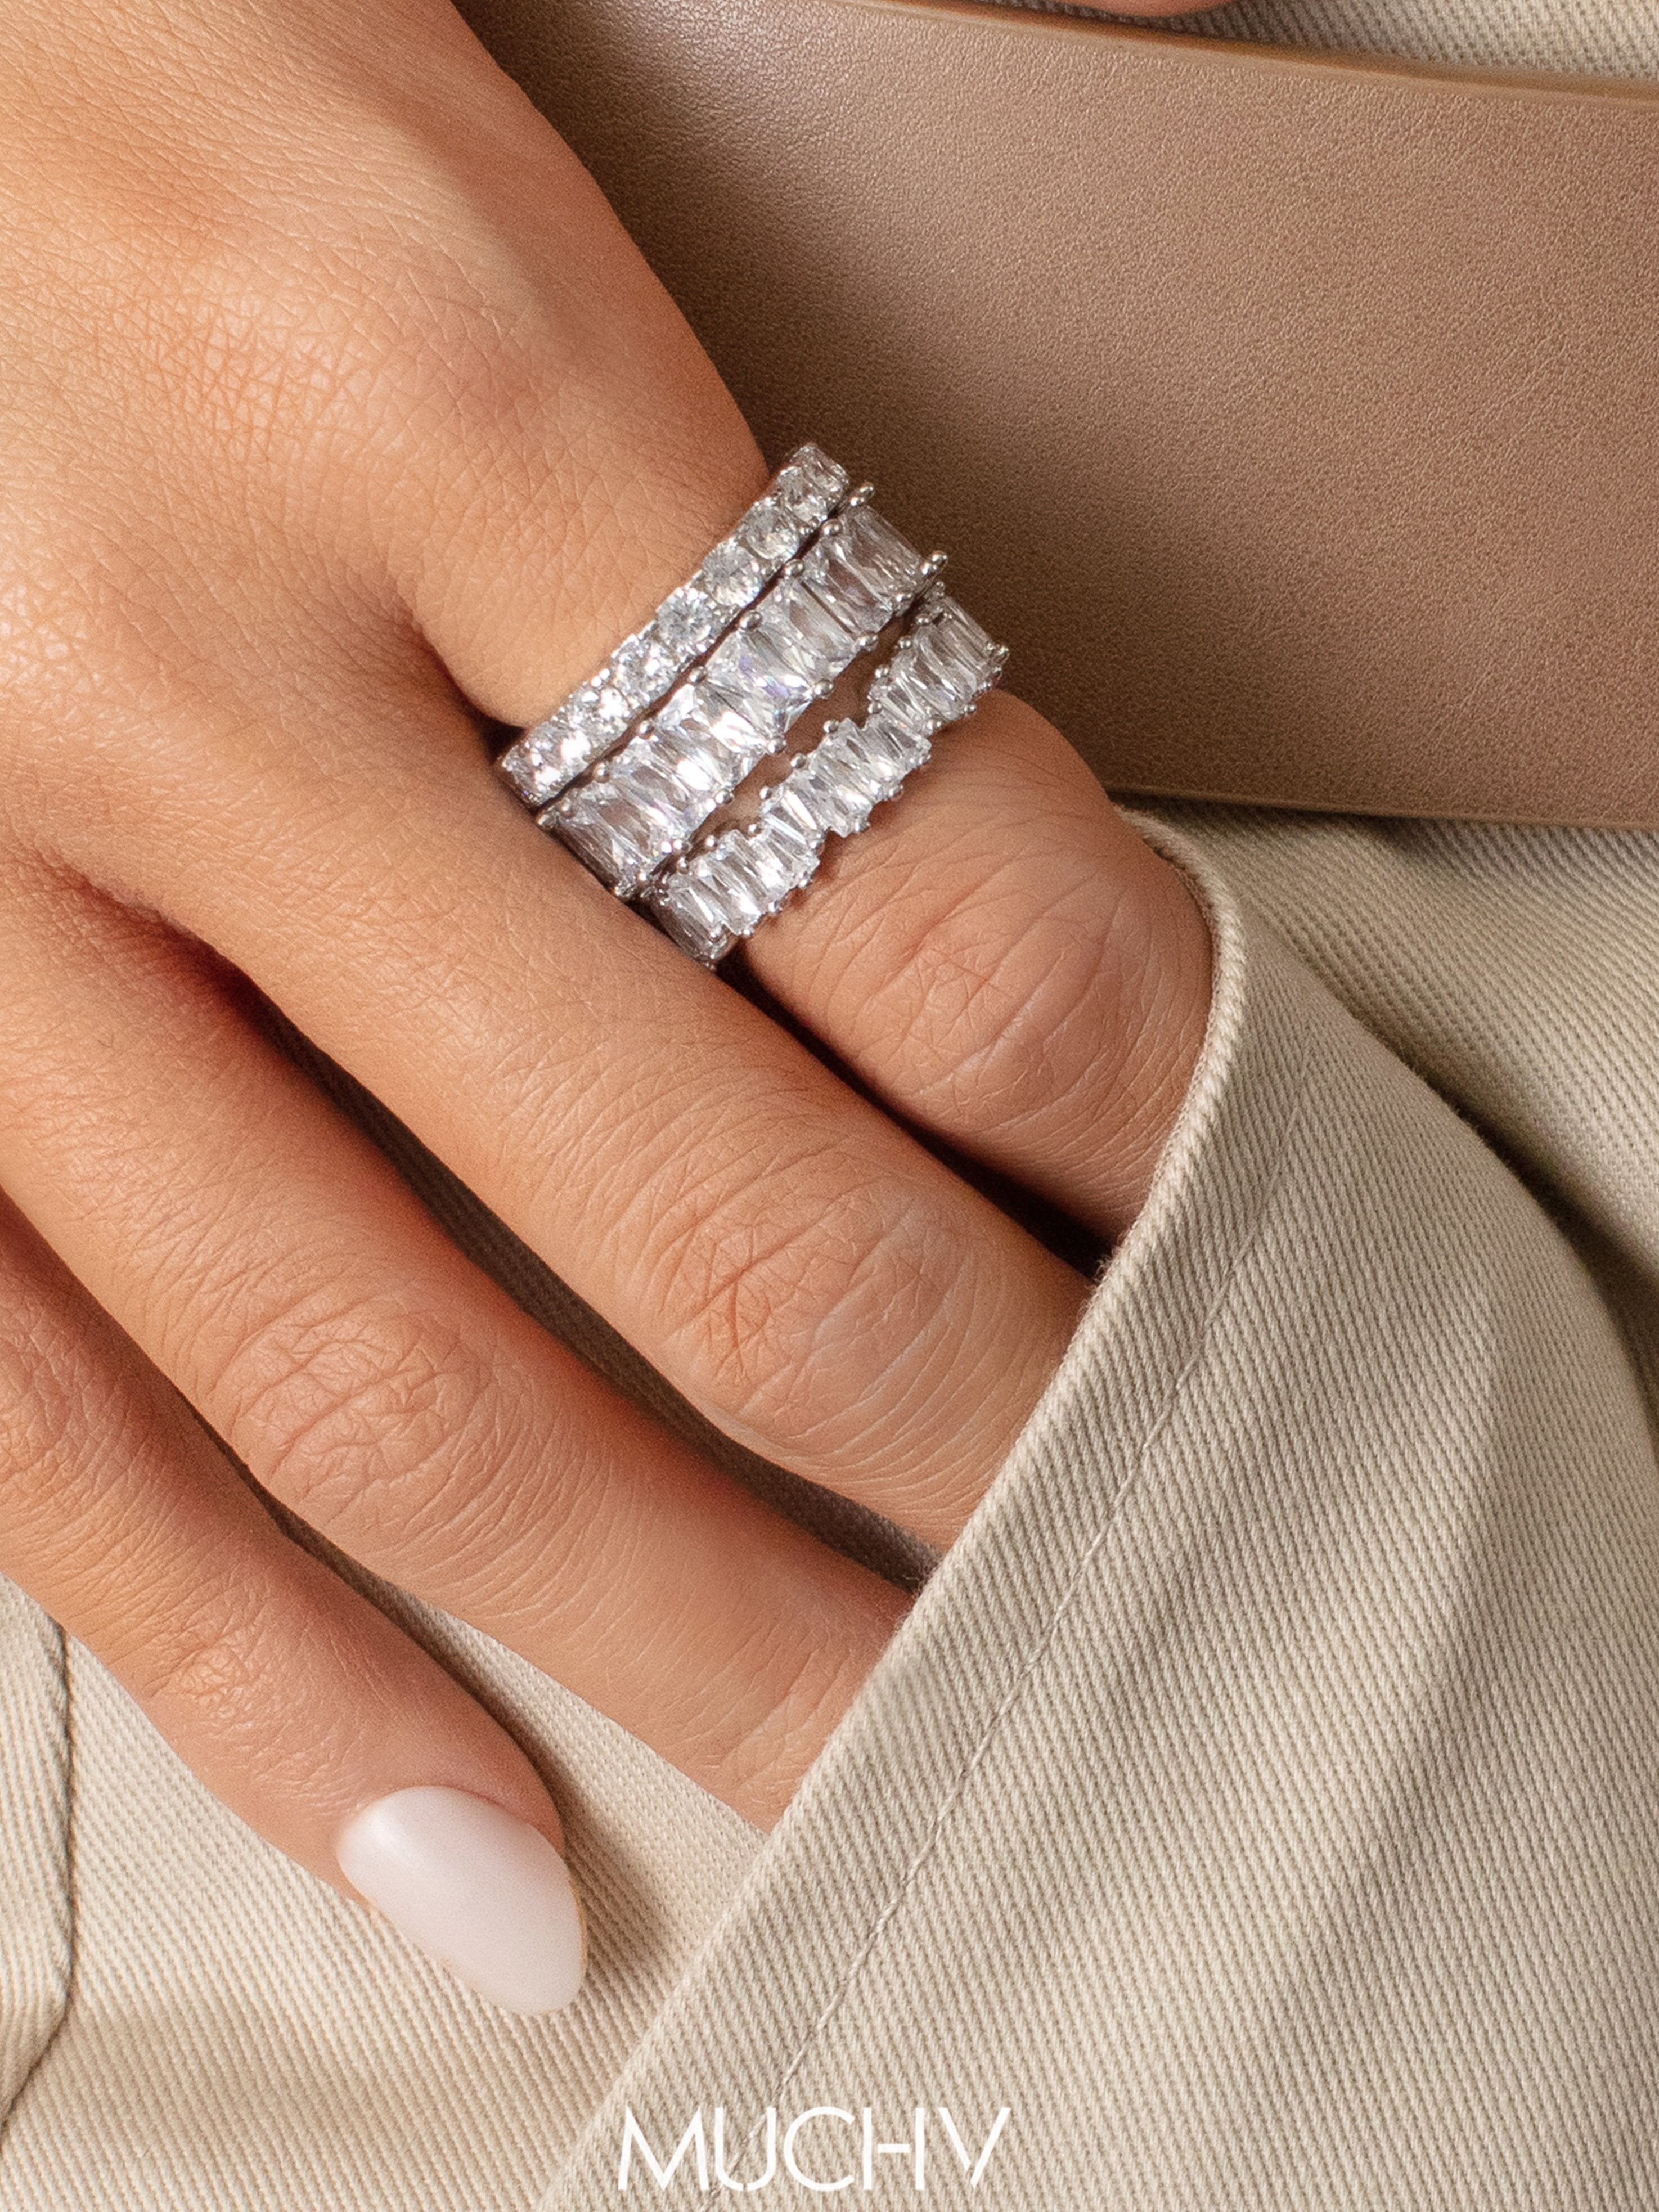 Hand with short pink nails wearing three sterling silver rings stacked together. Each ring band has different types of stones that range from round-shaped to emerald-shaped.